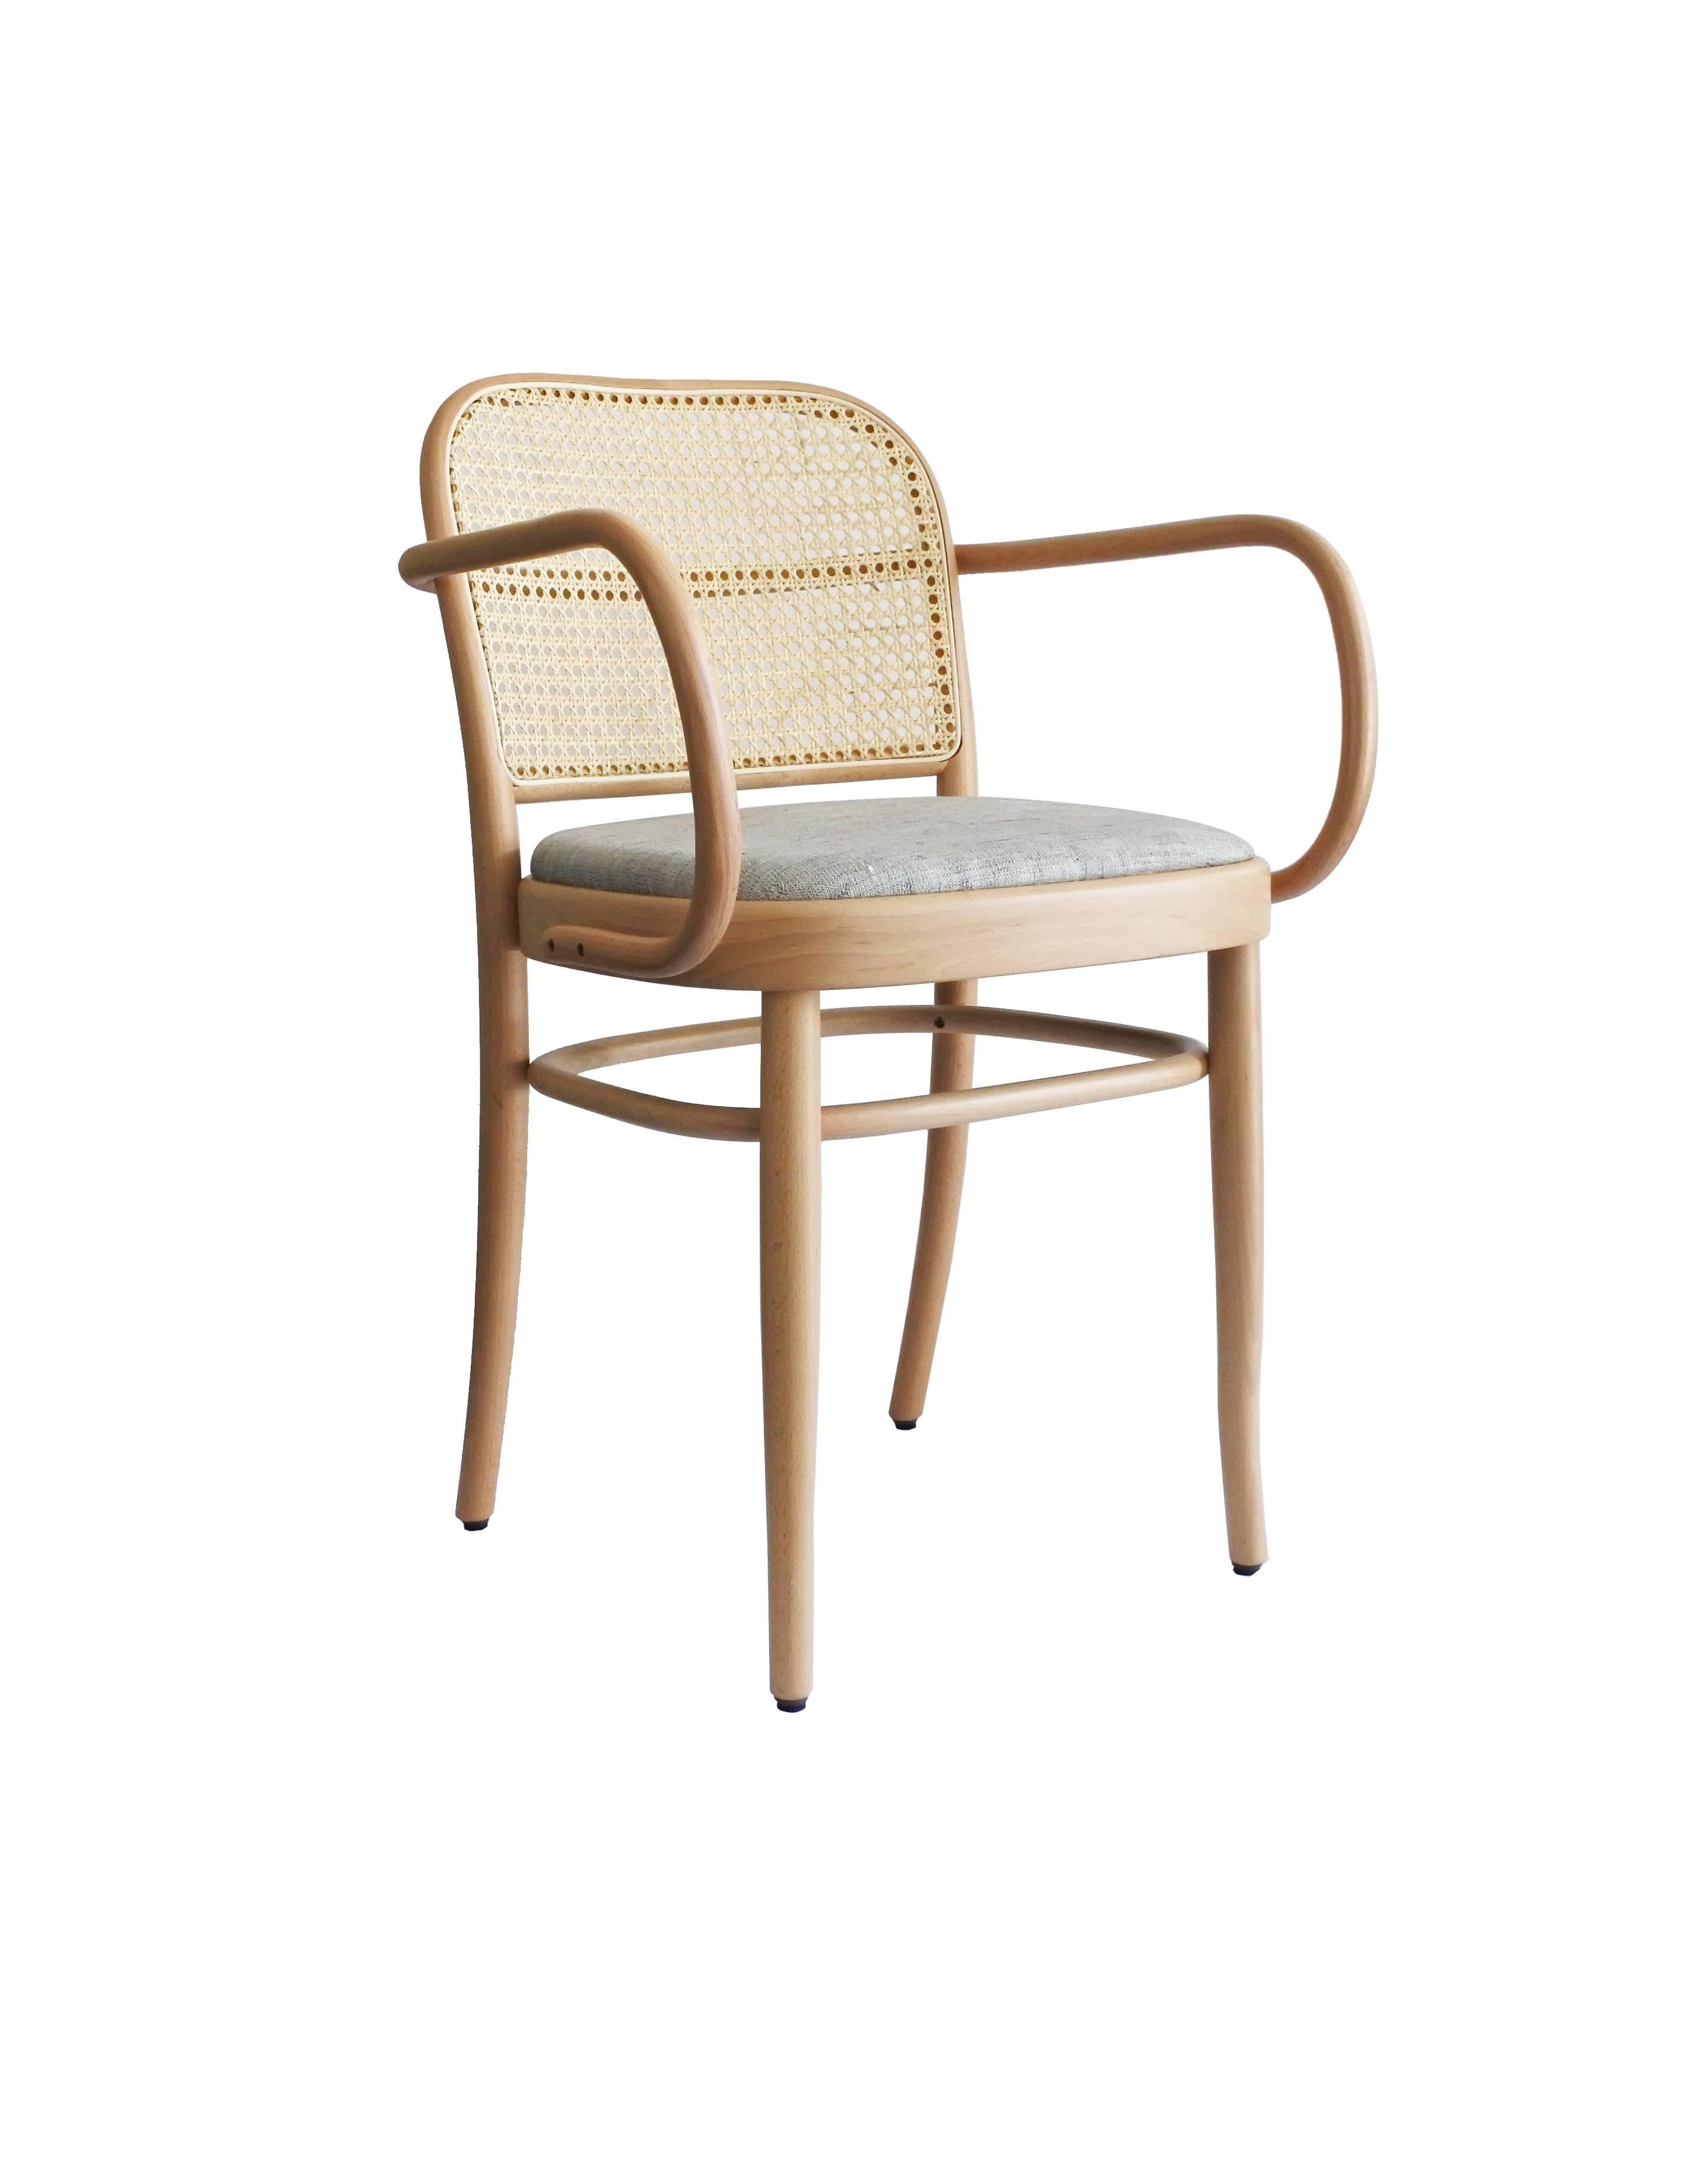 Steam bent beech chair and stool, designed by Josef Hoffmann in 1930. A timeless and modern design gives the chair N. 811 an outstanding comfort and lightness. Available in three versions: woven cane seat and backrest, upholstered seat and woven